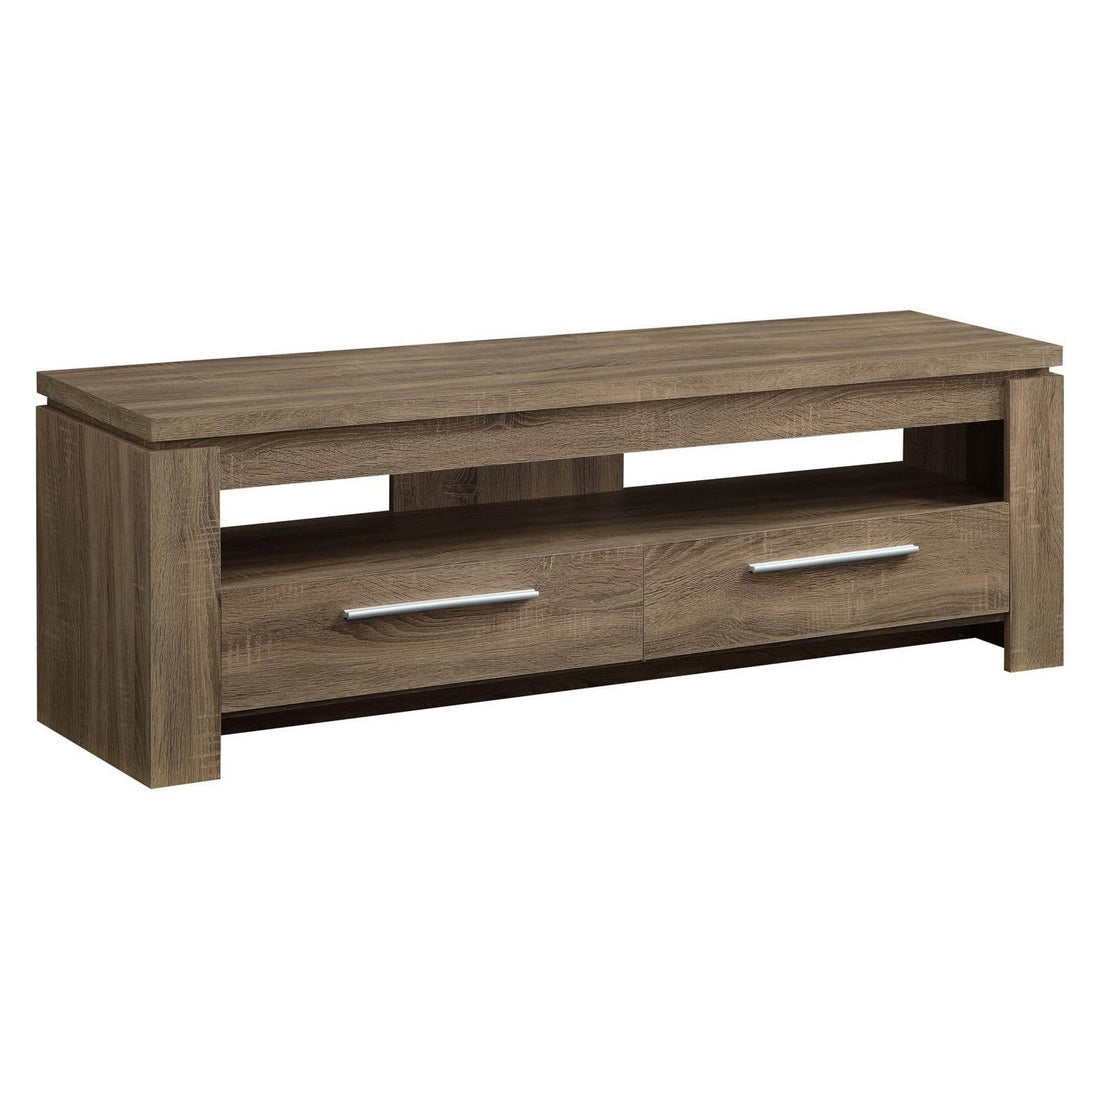 Elkton 2-drawer TV Console Weathered Brown 701975